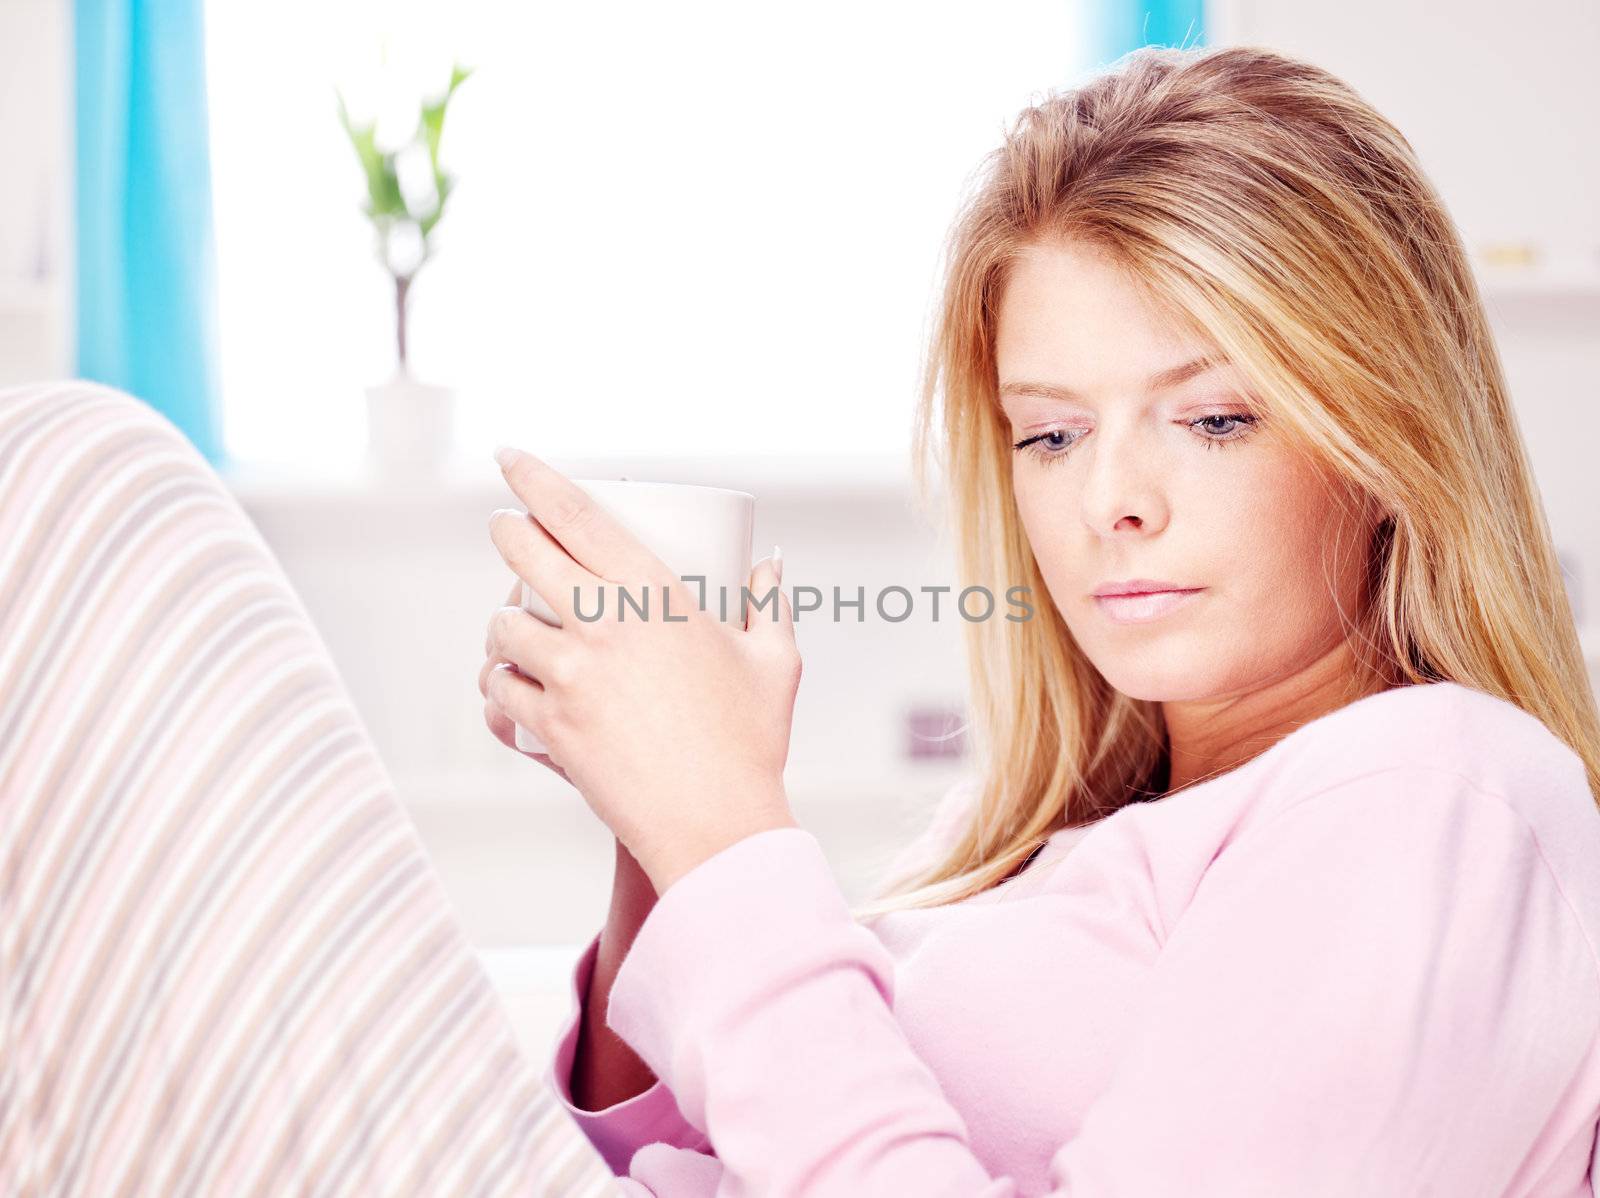 Conceived blond woman at home holding cup of tea